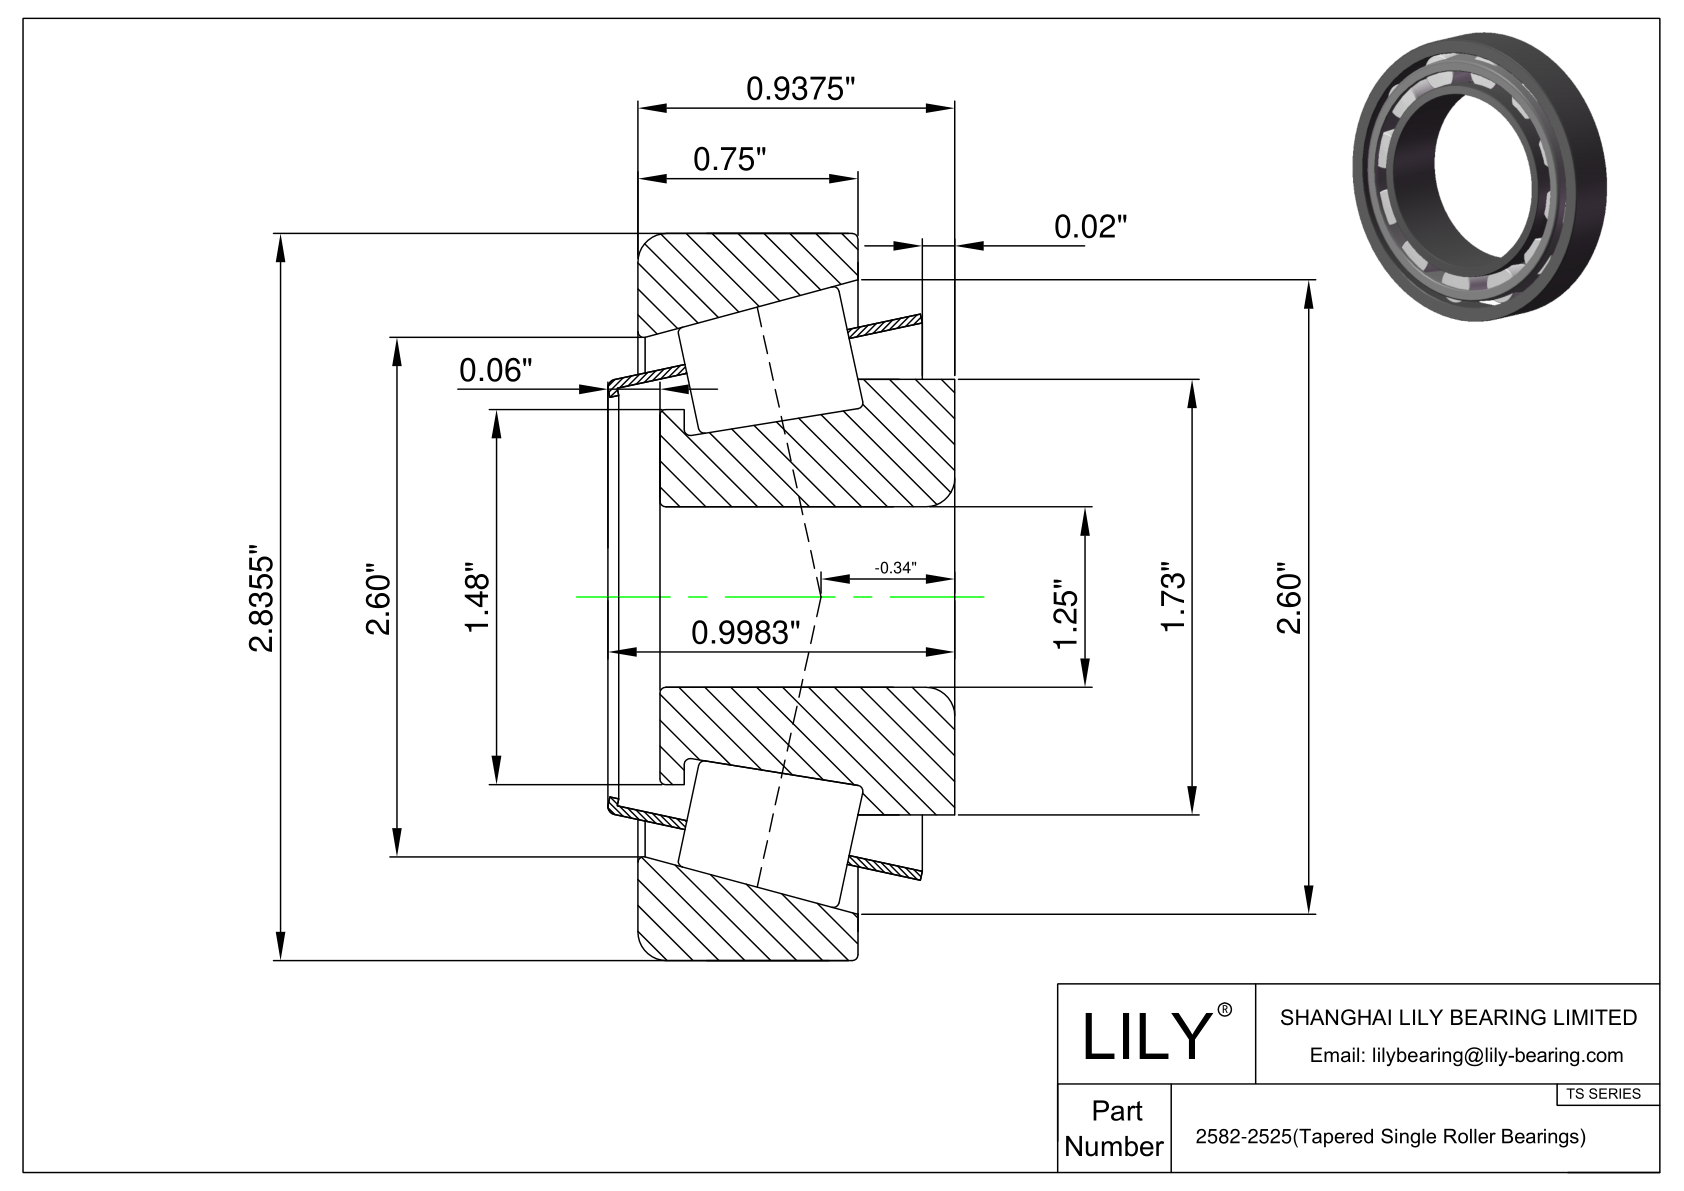 2582-2525 TS (Tapered Single Roller Bearings) (Imperial) cad drawing